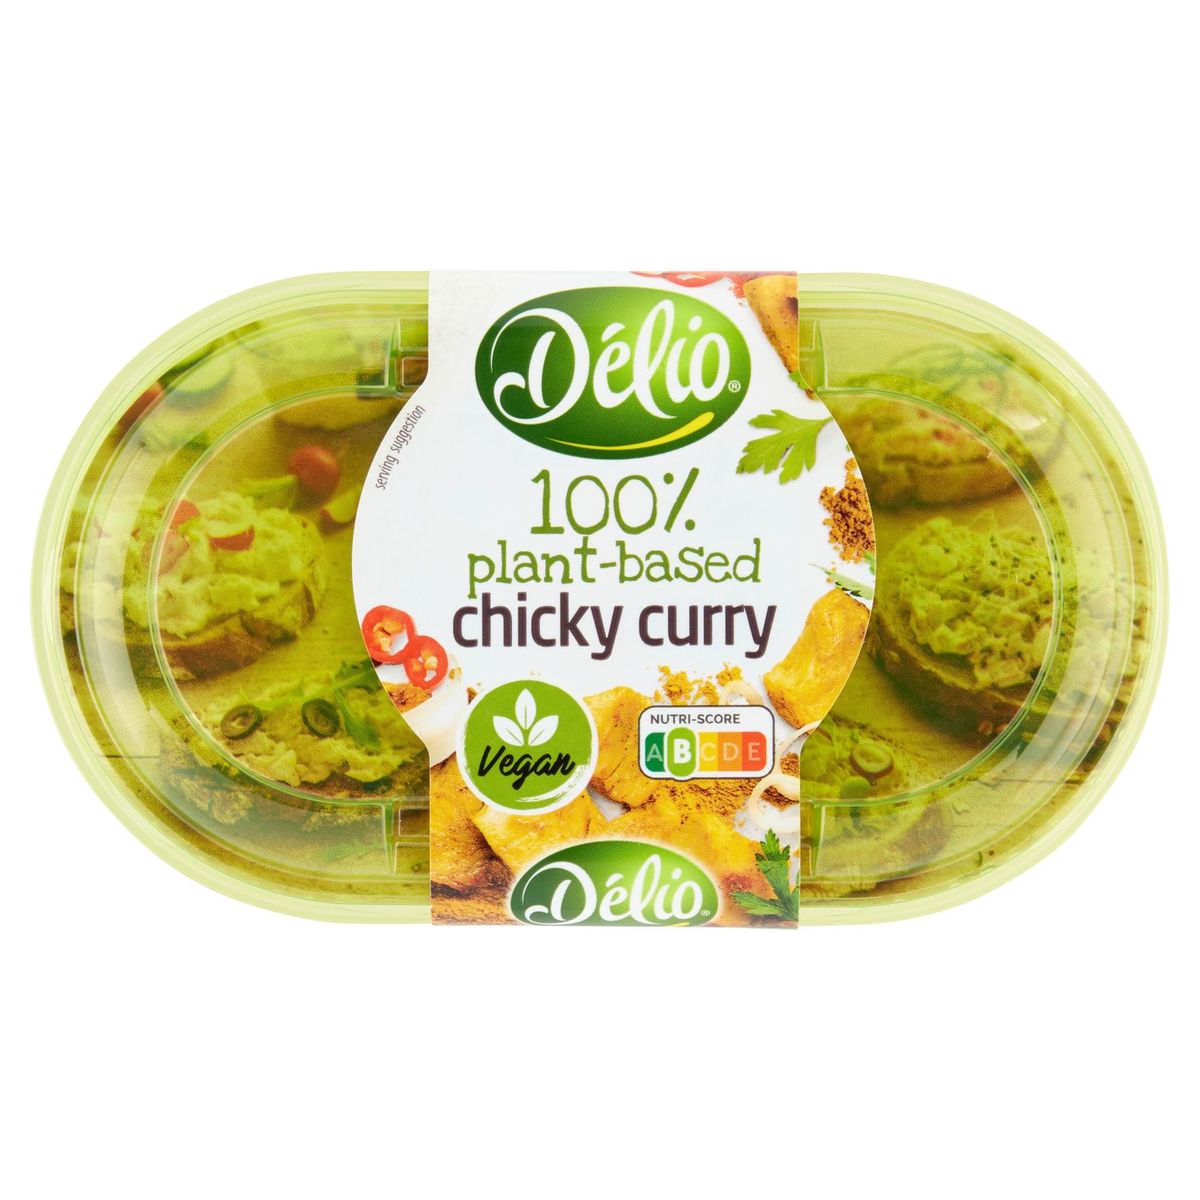 Délio Chicky Curry 180 g